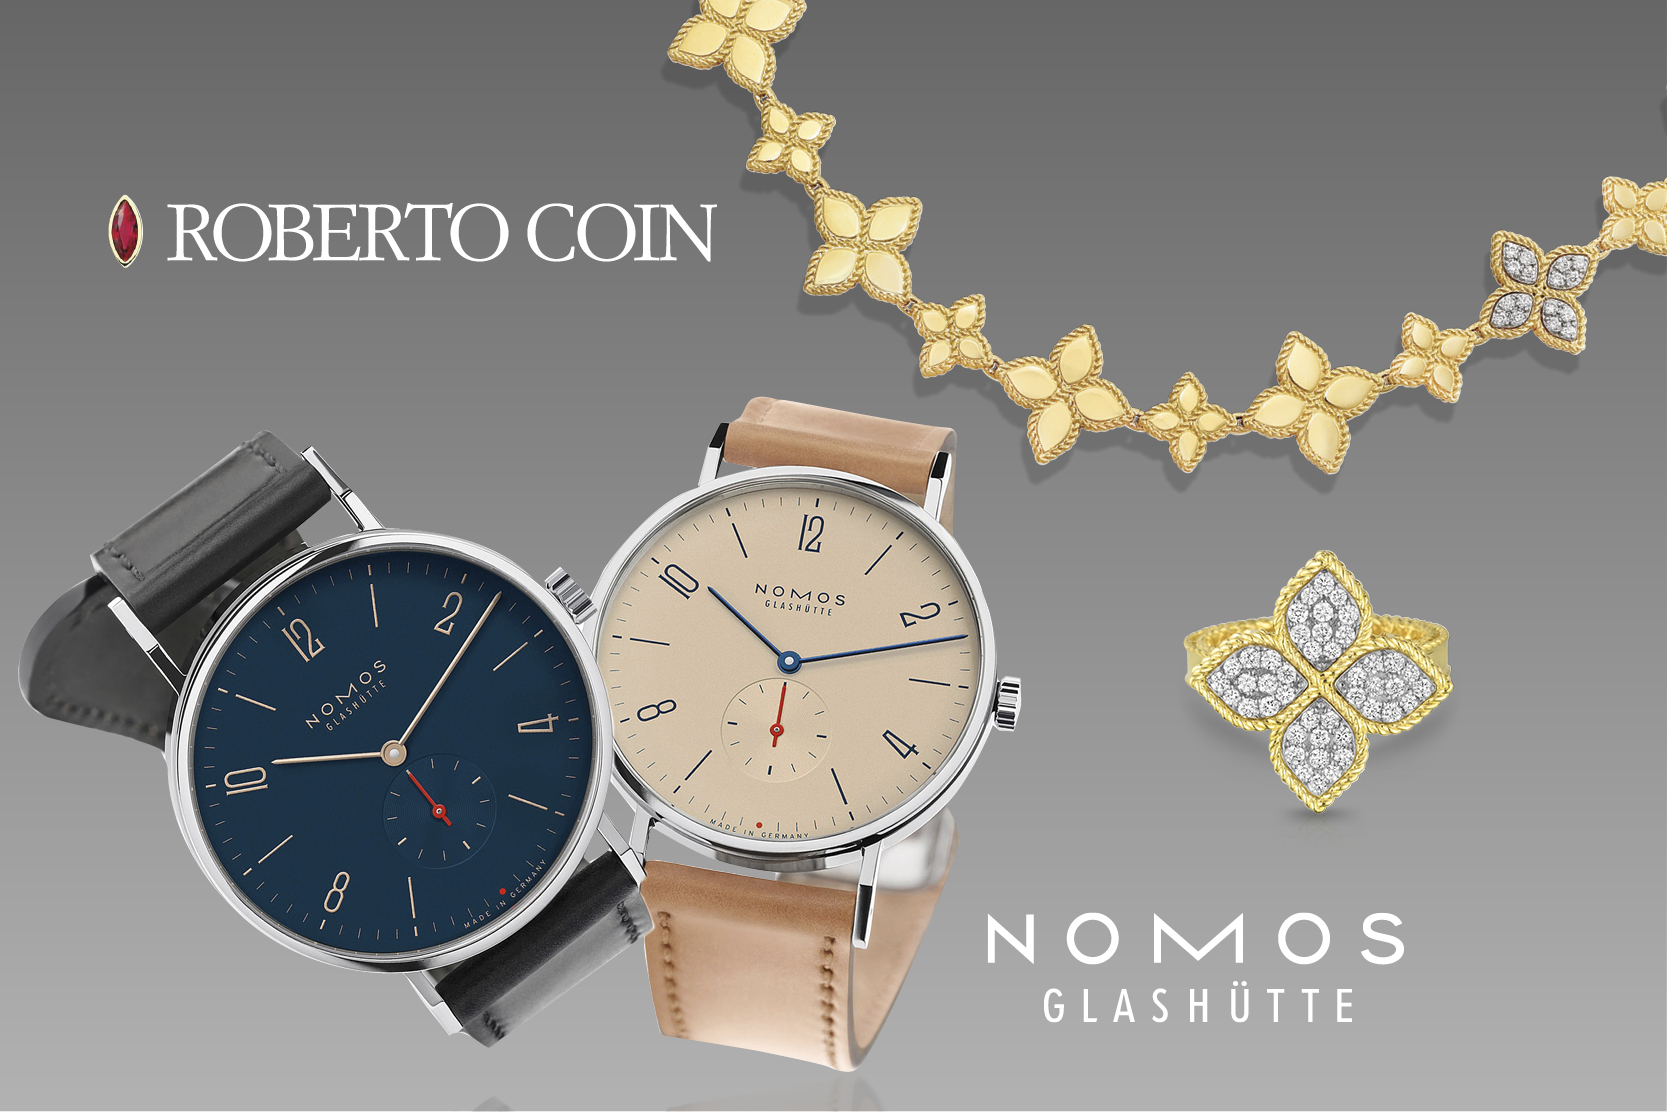 Watch & Scotch featuring Nomos and Roberto Coin